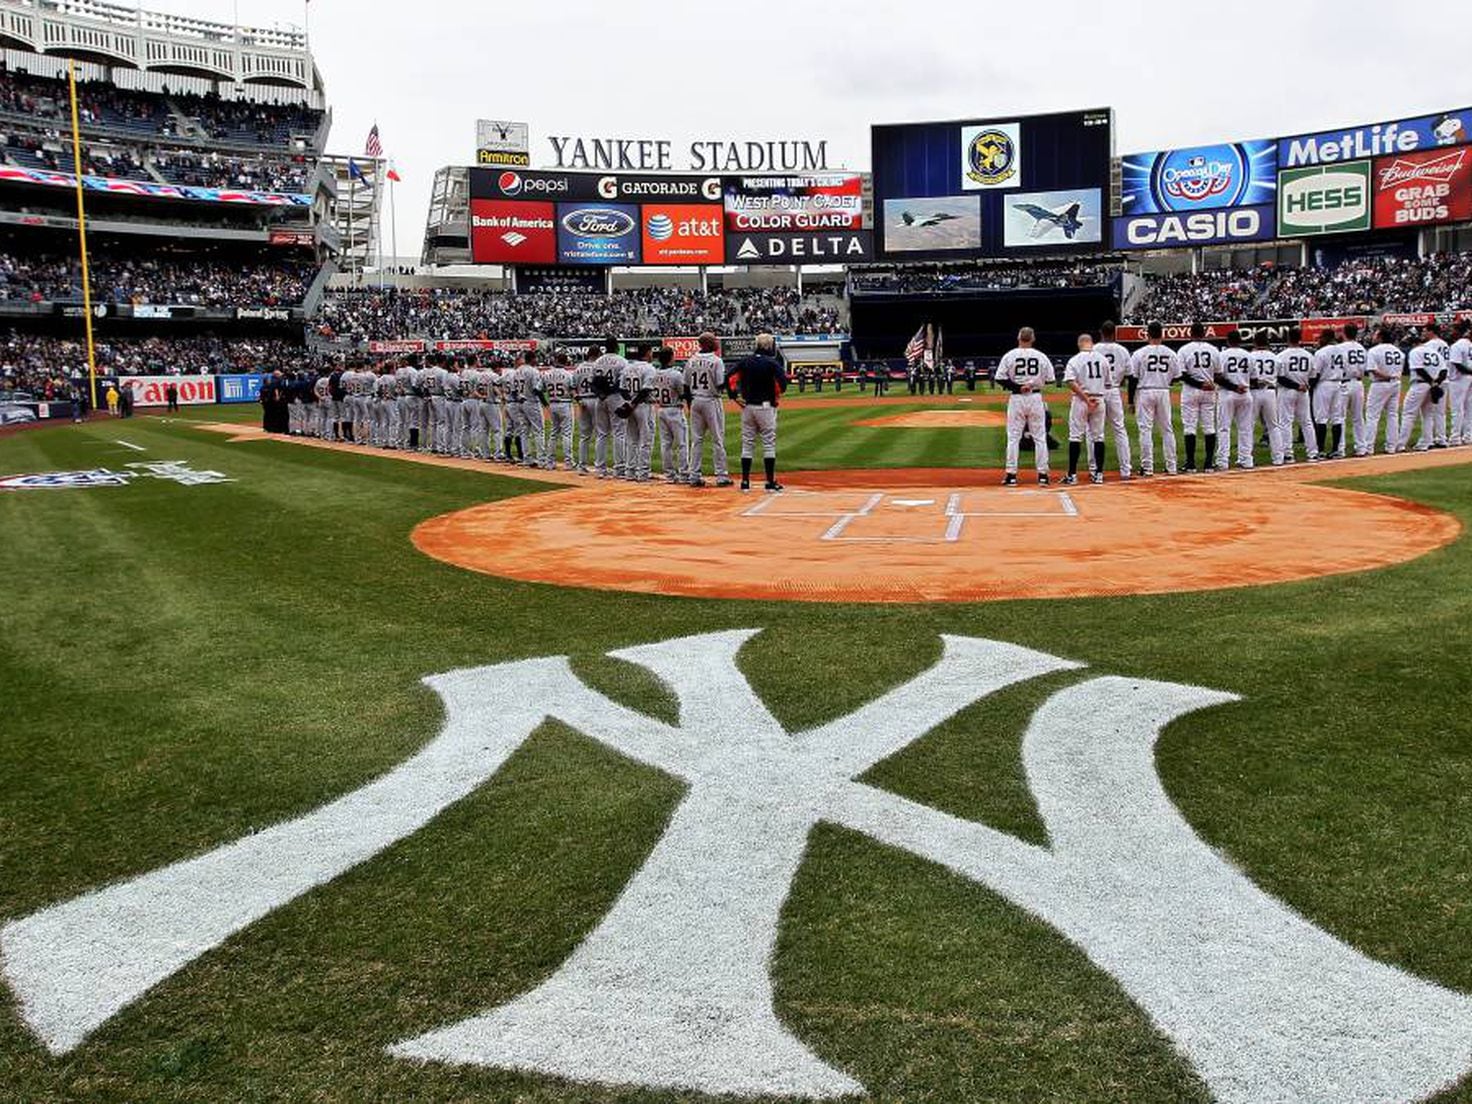 How much money did the Yankees get for putting Star Insurance